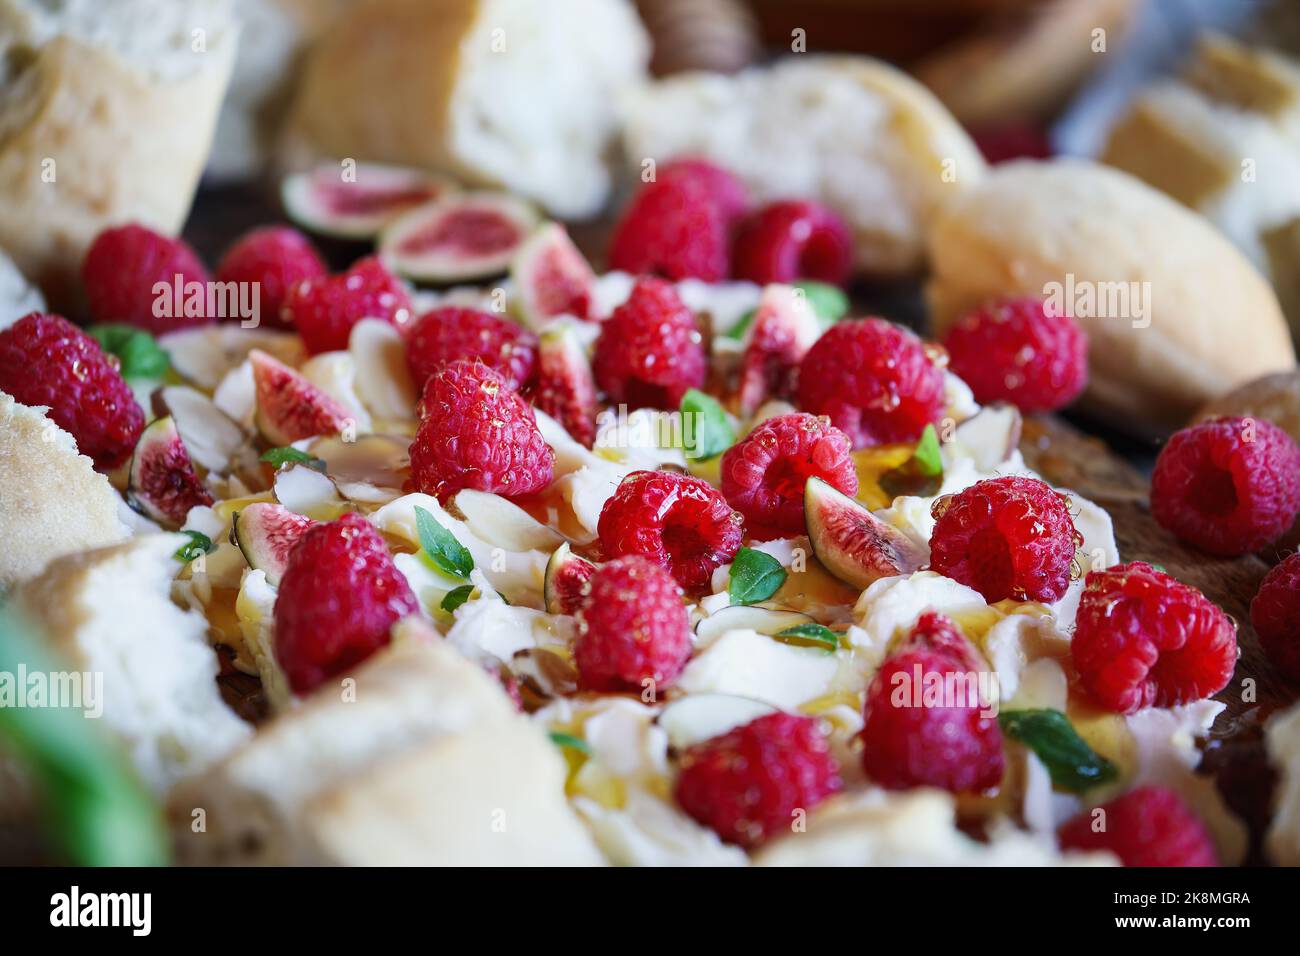 Butter board topped with fresh raspberries, figs, sliced almonds, basil leaves, and drizzled with honey. Selective focus with blurred background. Stock Photo